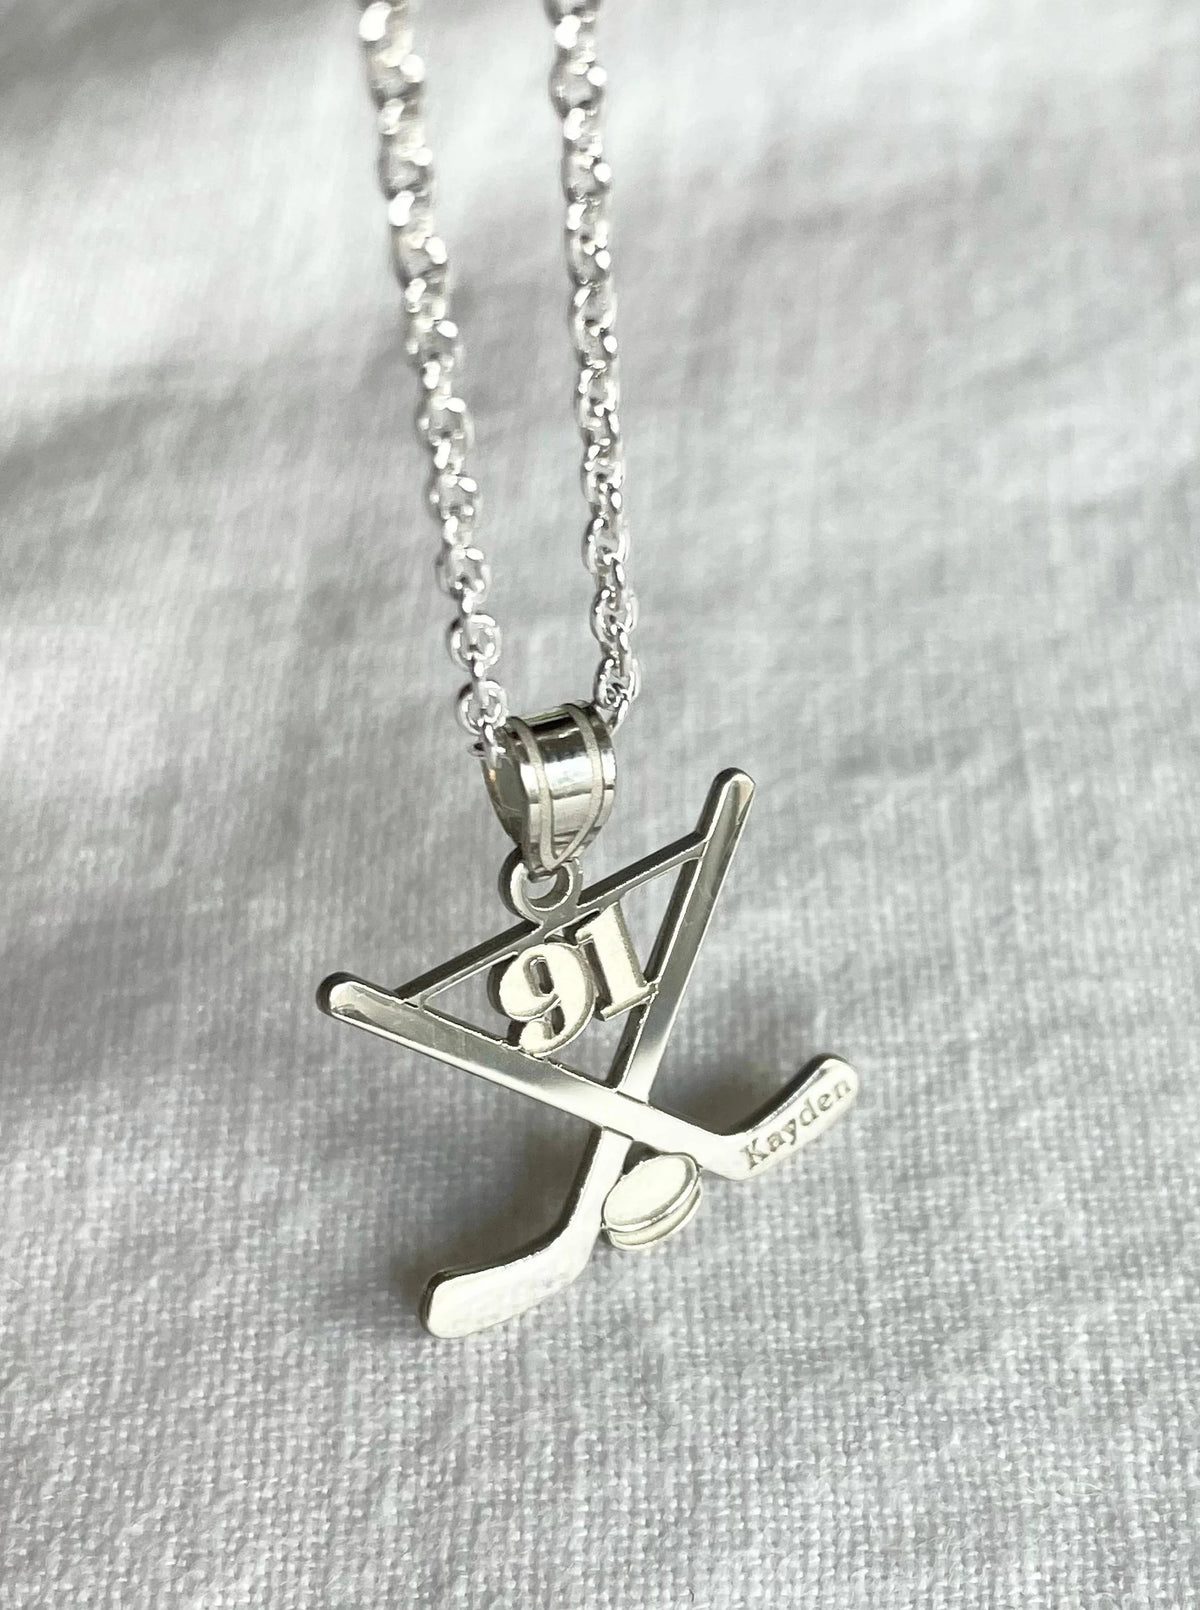 Personalized Ice Hockey Sticks Pendant w/ Name & Number Necklace included  in Sterling Silver , Gold Plated or 10k Gold Laser Engraved